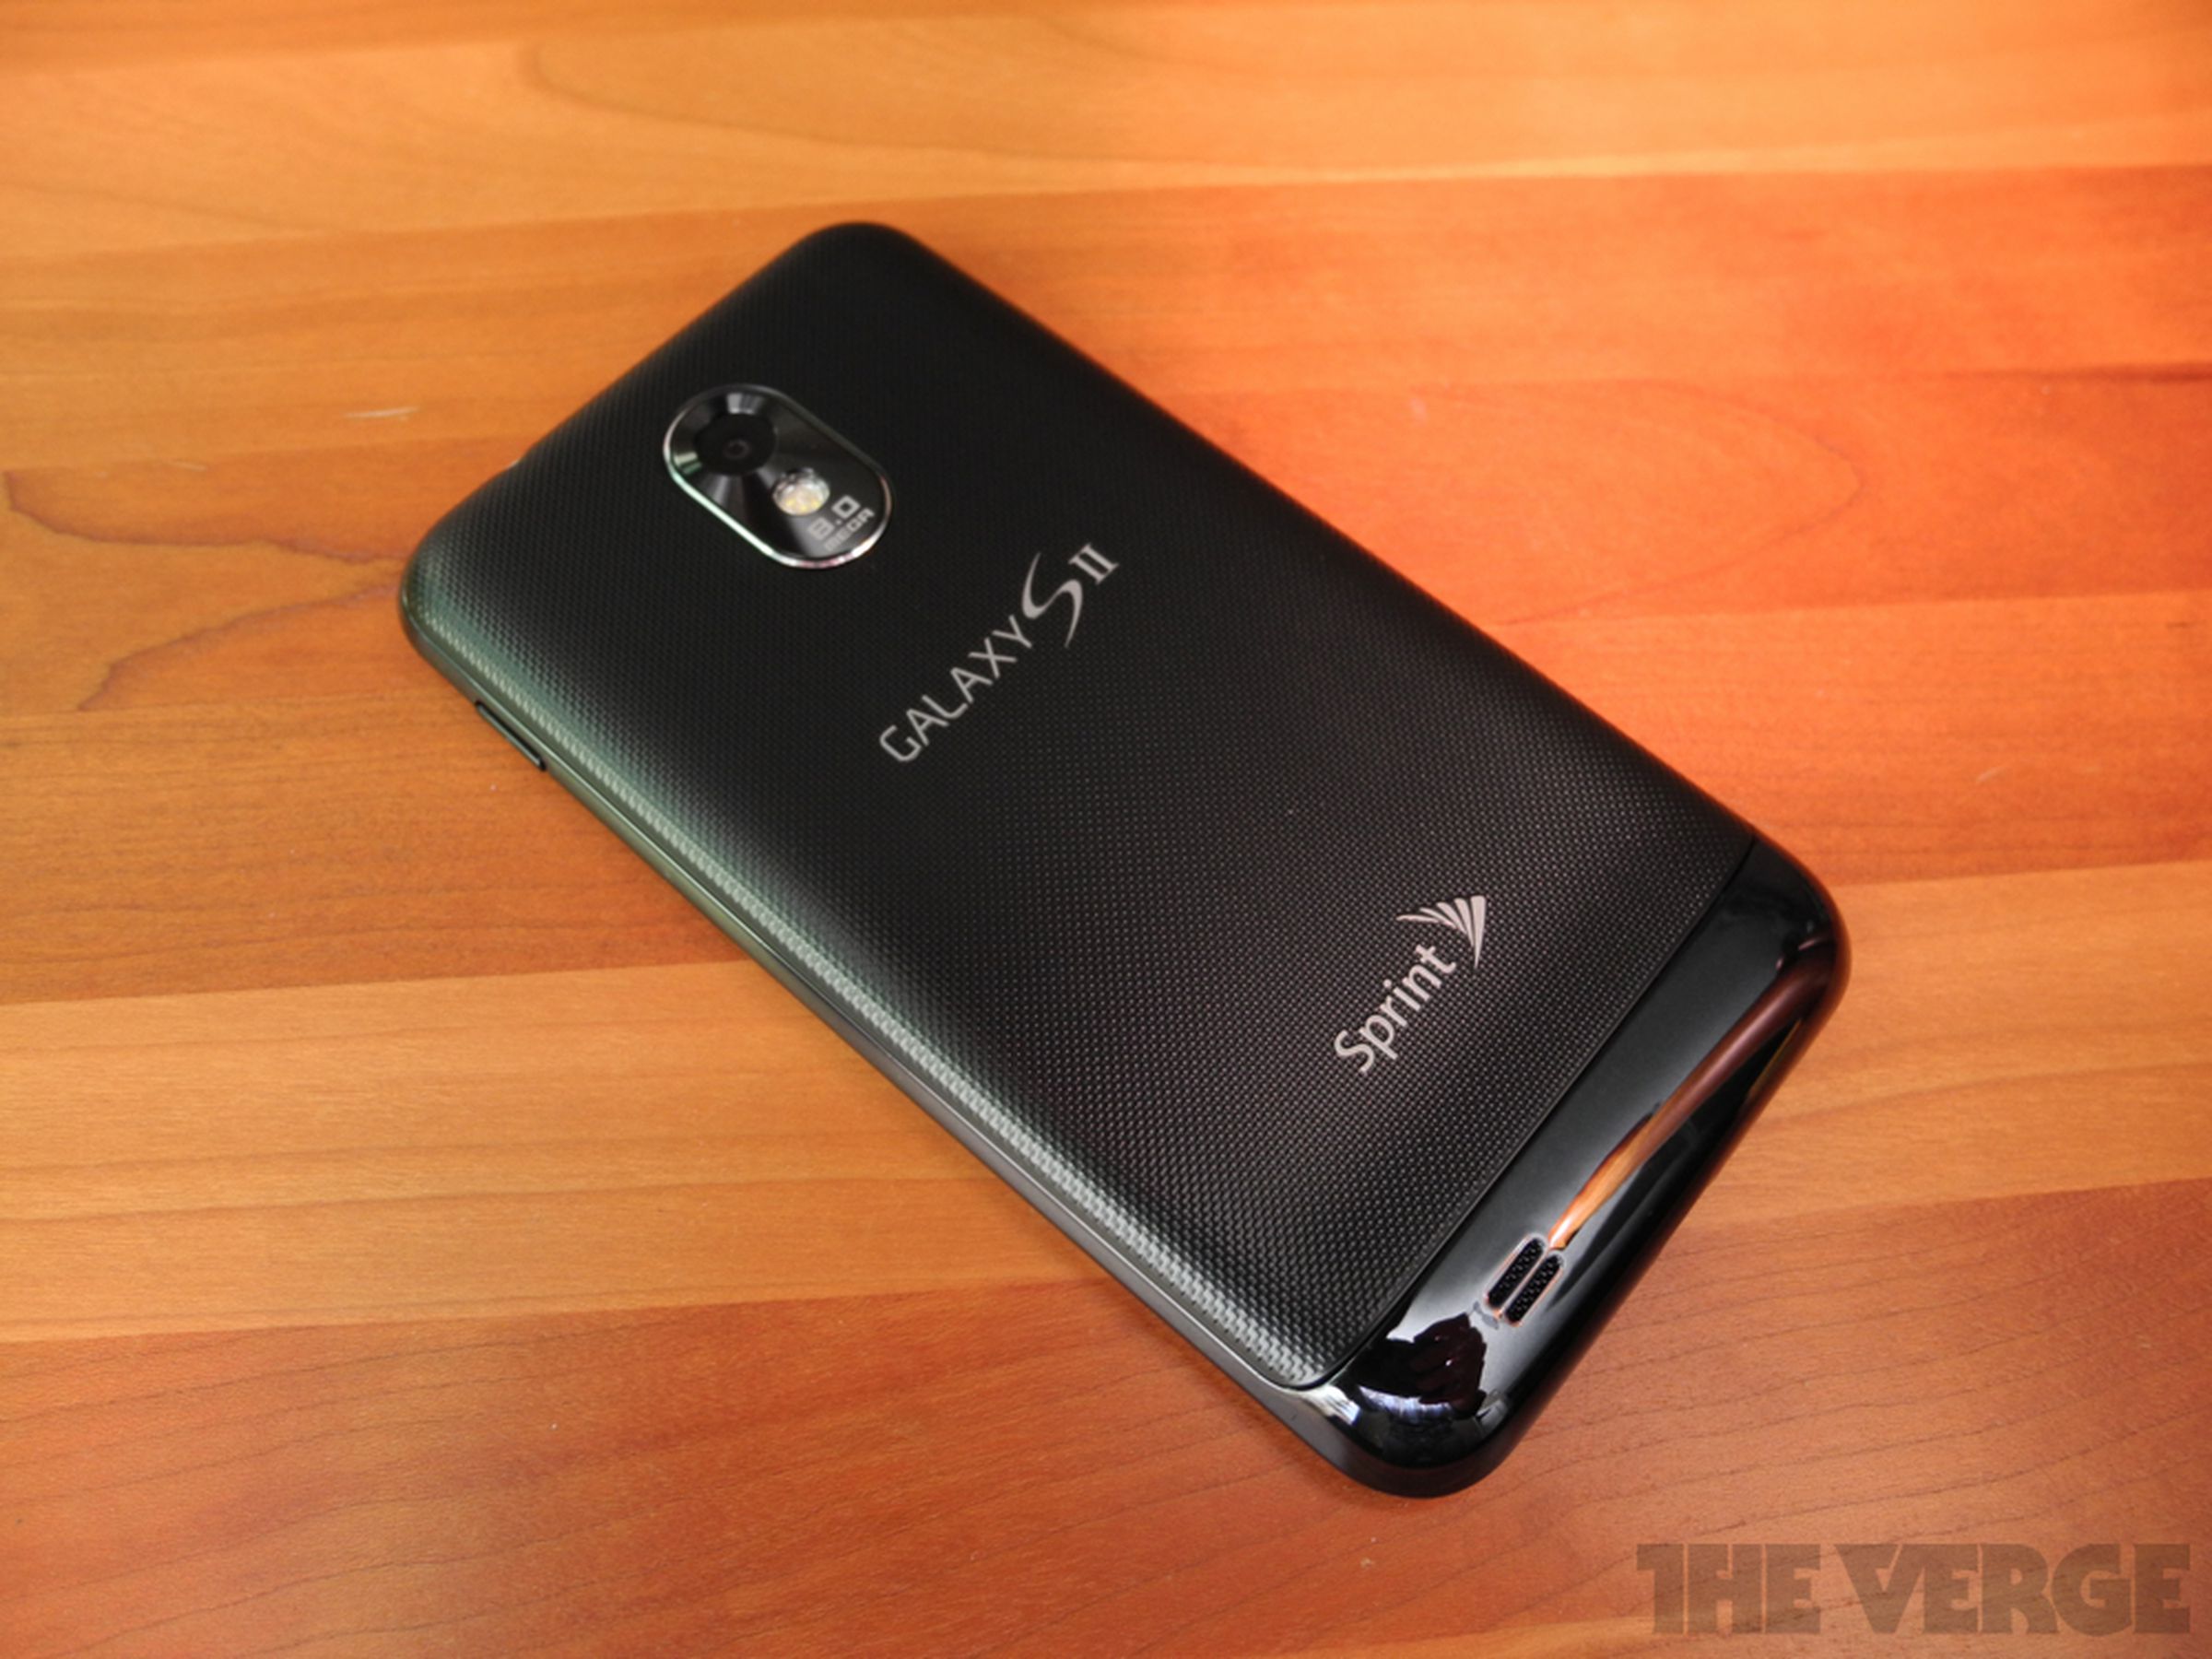 Samsung Galaxy S II Epic 4G Touch review